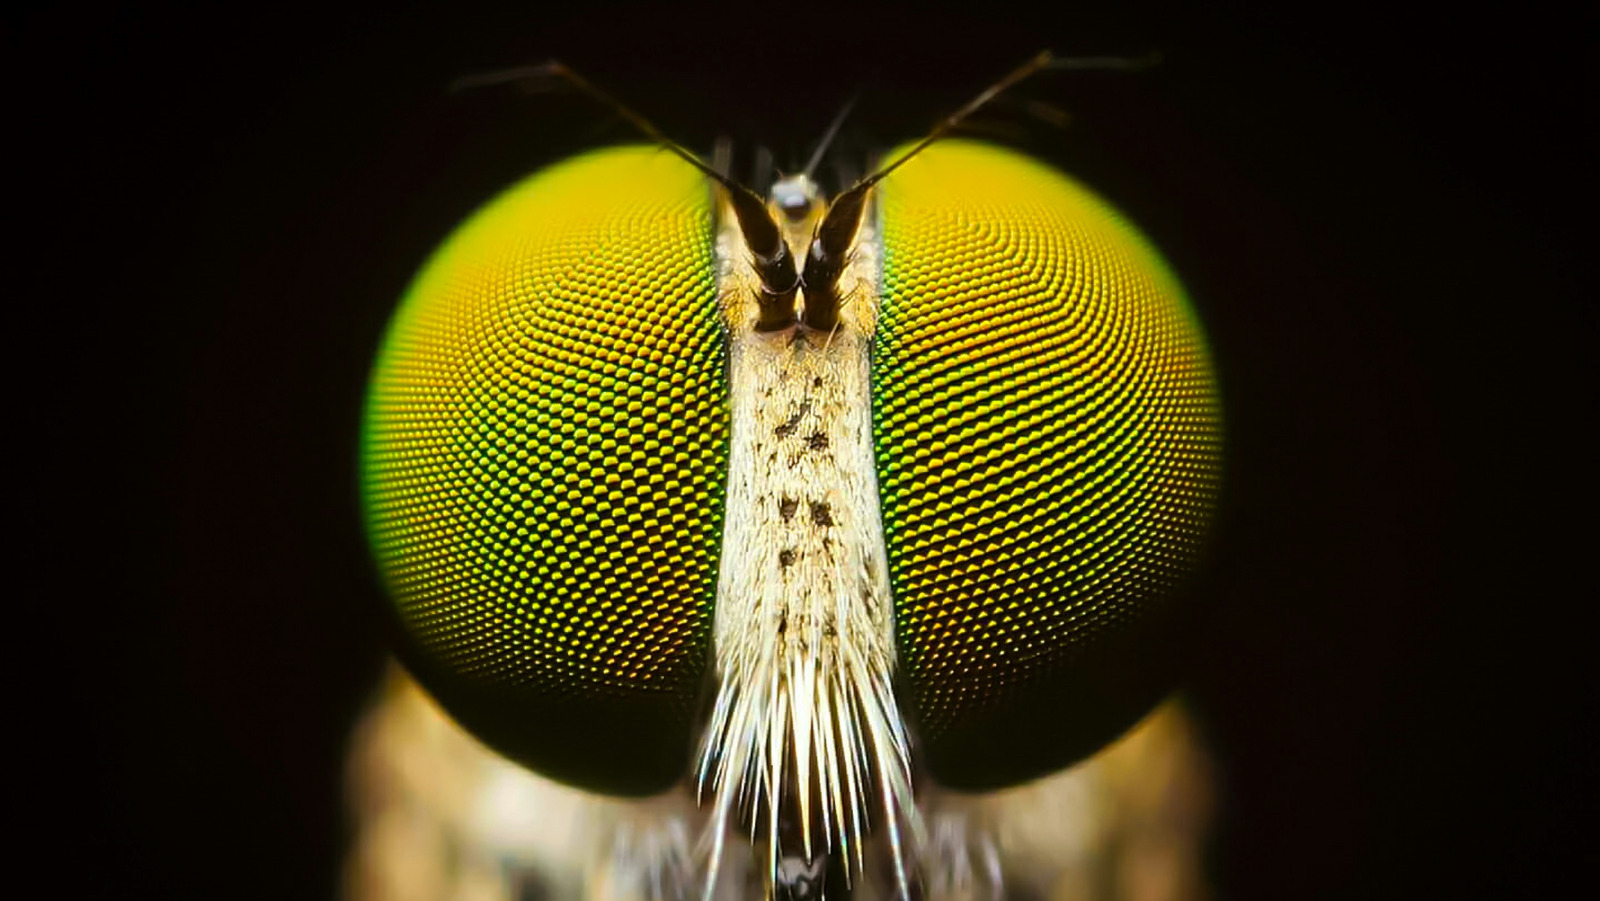 https://www.grunge.com/img/gallery/this-is-what-the-compound-eye-of-a-fly-actually-sees/l-intro-1647447678.jpg